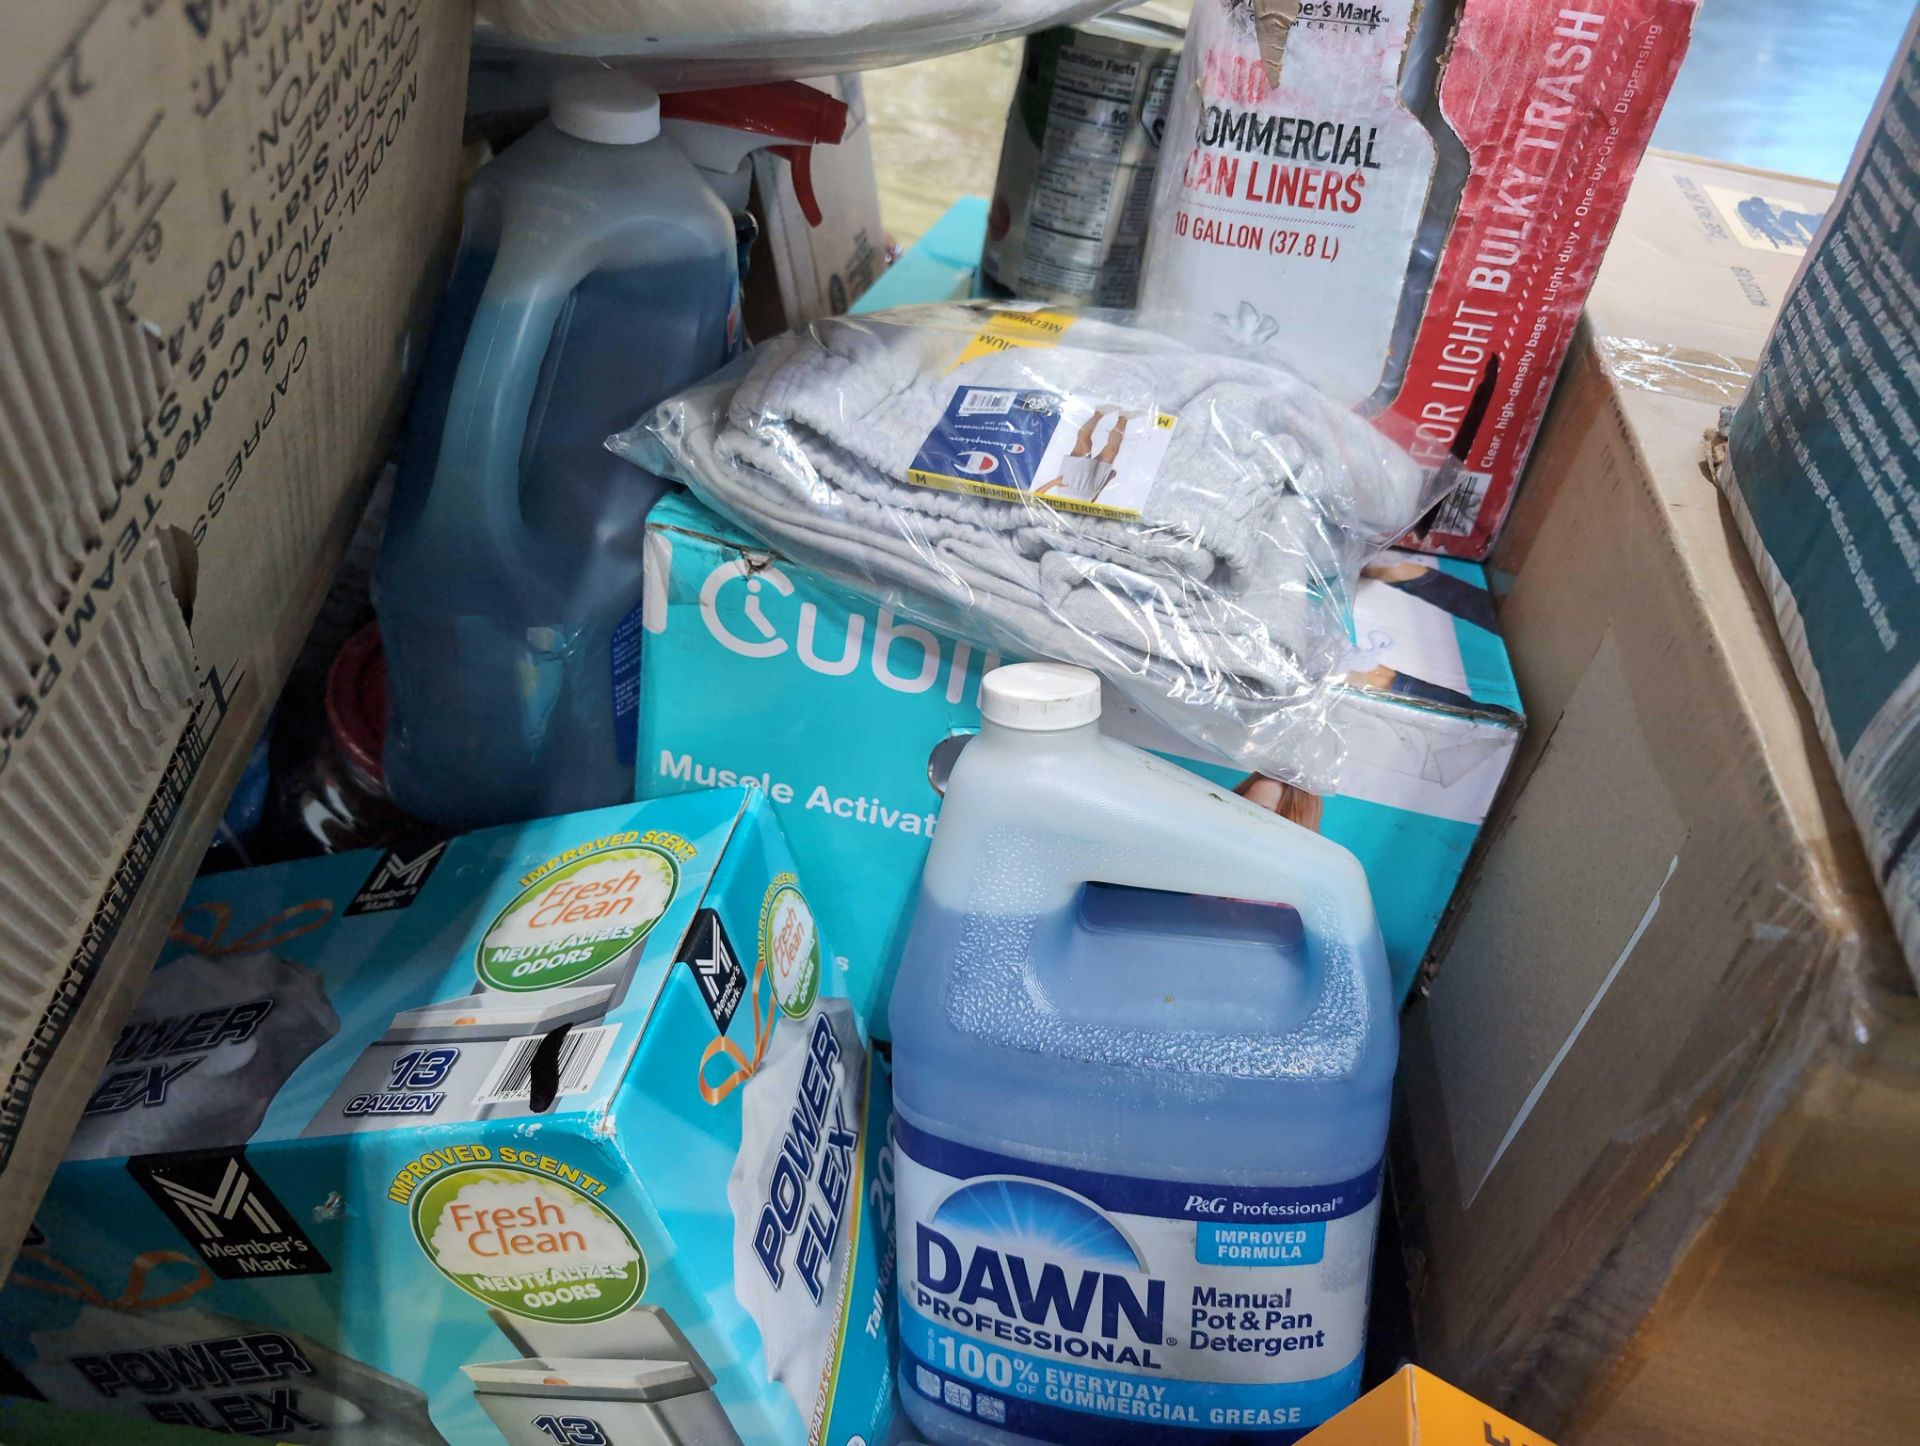 Big box store in a box: Canned chicke, Paper towels, baket chips, ketchup, trash liners, Cubii seate - Image 8 of 14